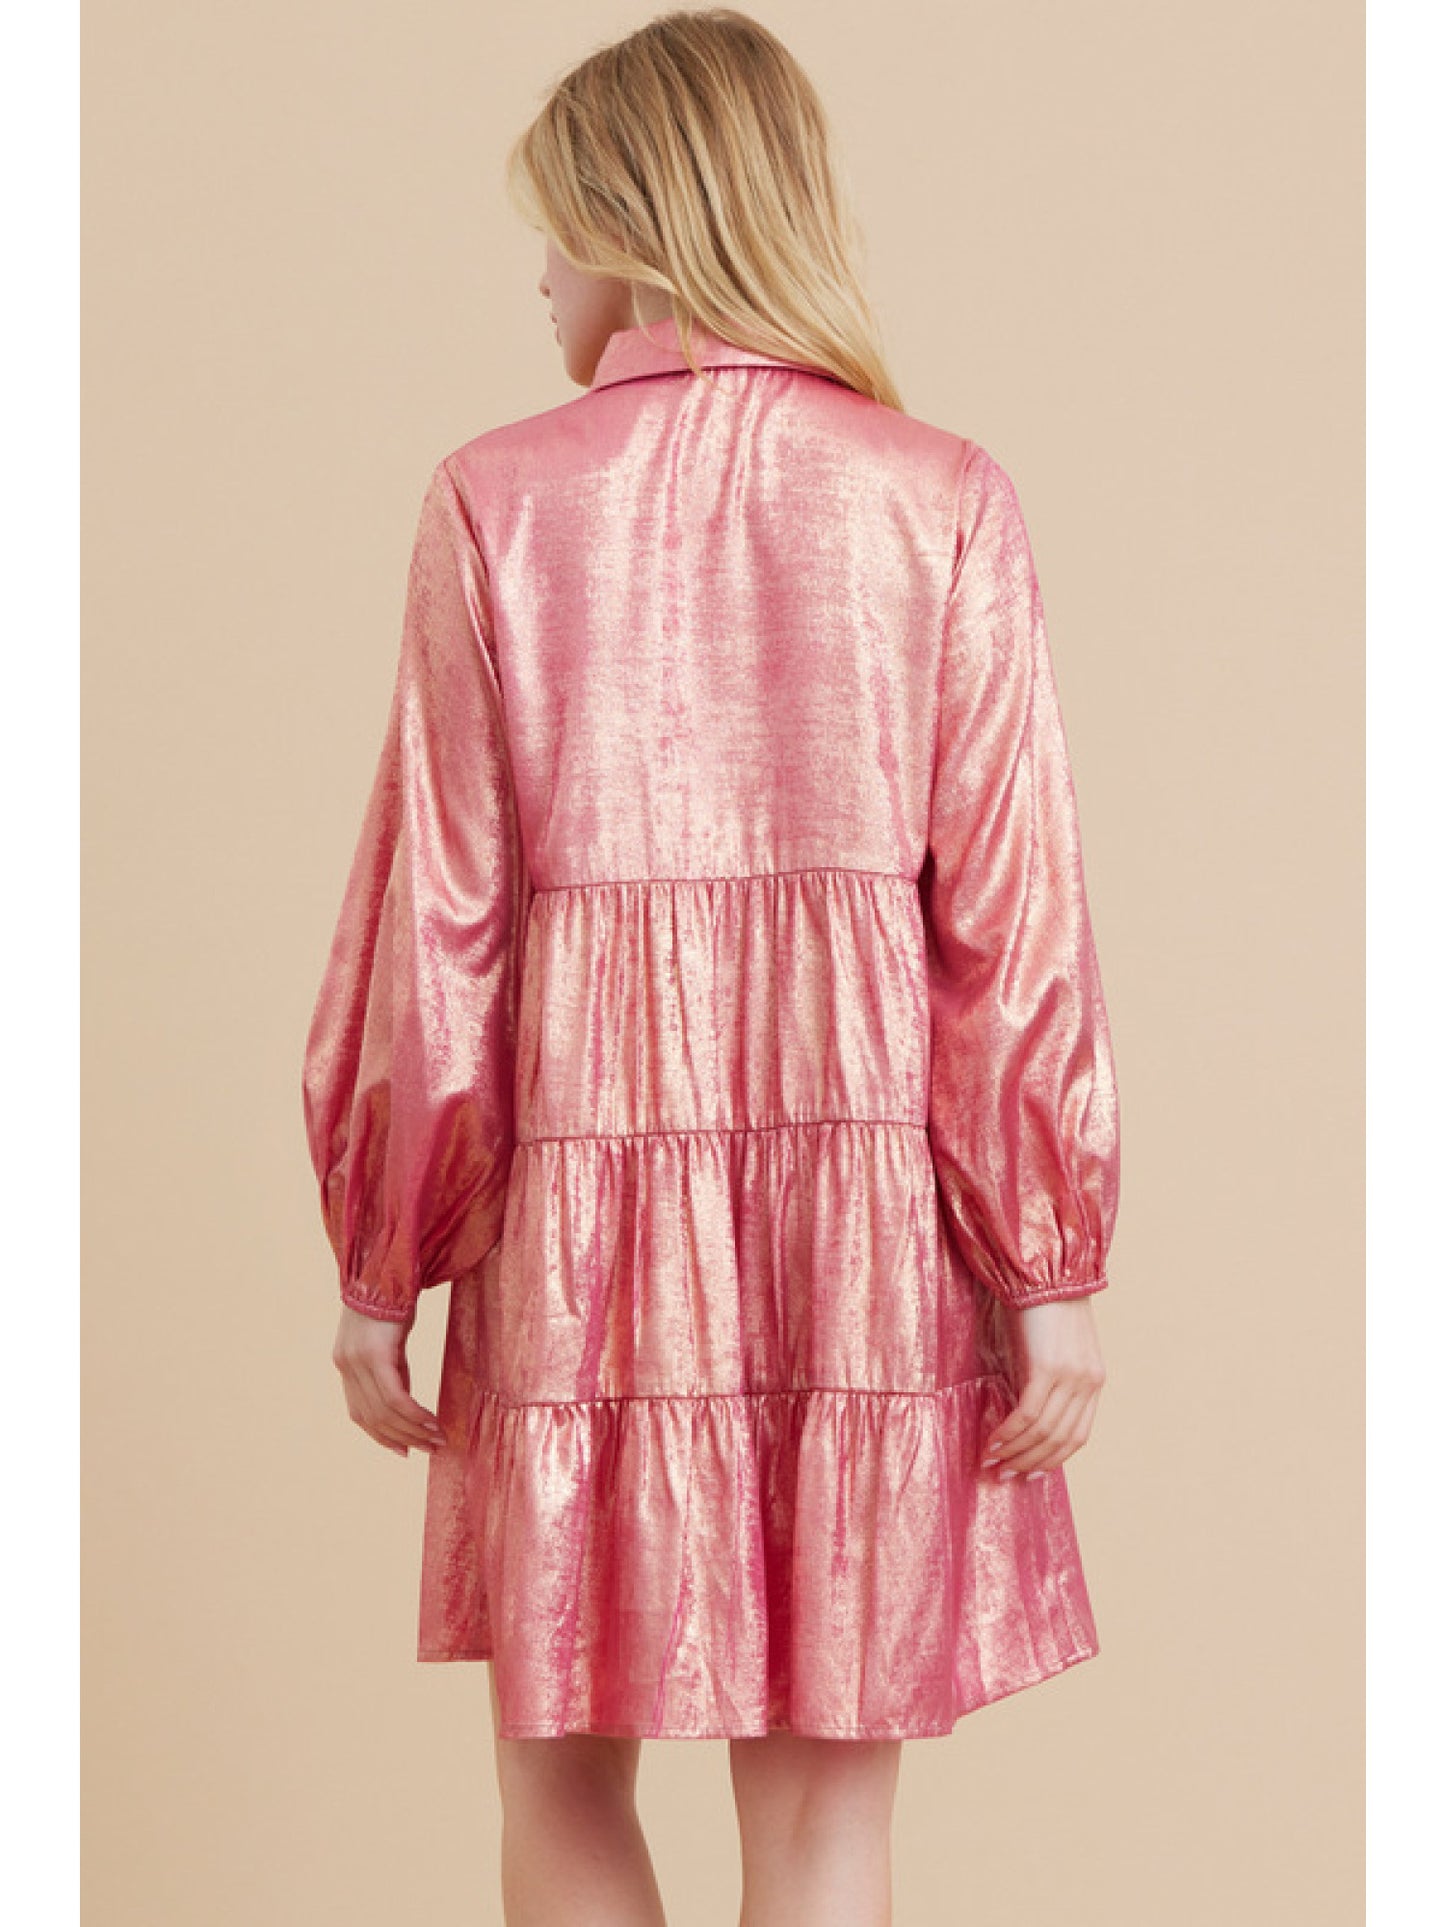 Copy of Metallic Baby Doll Dress in Hot Pink